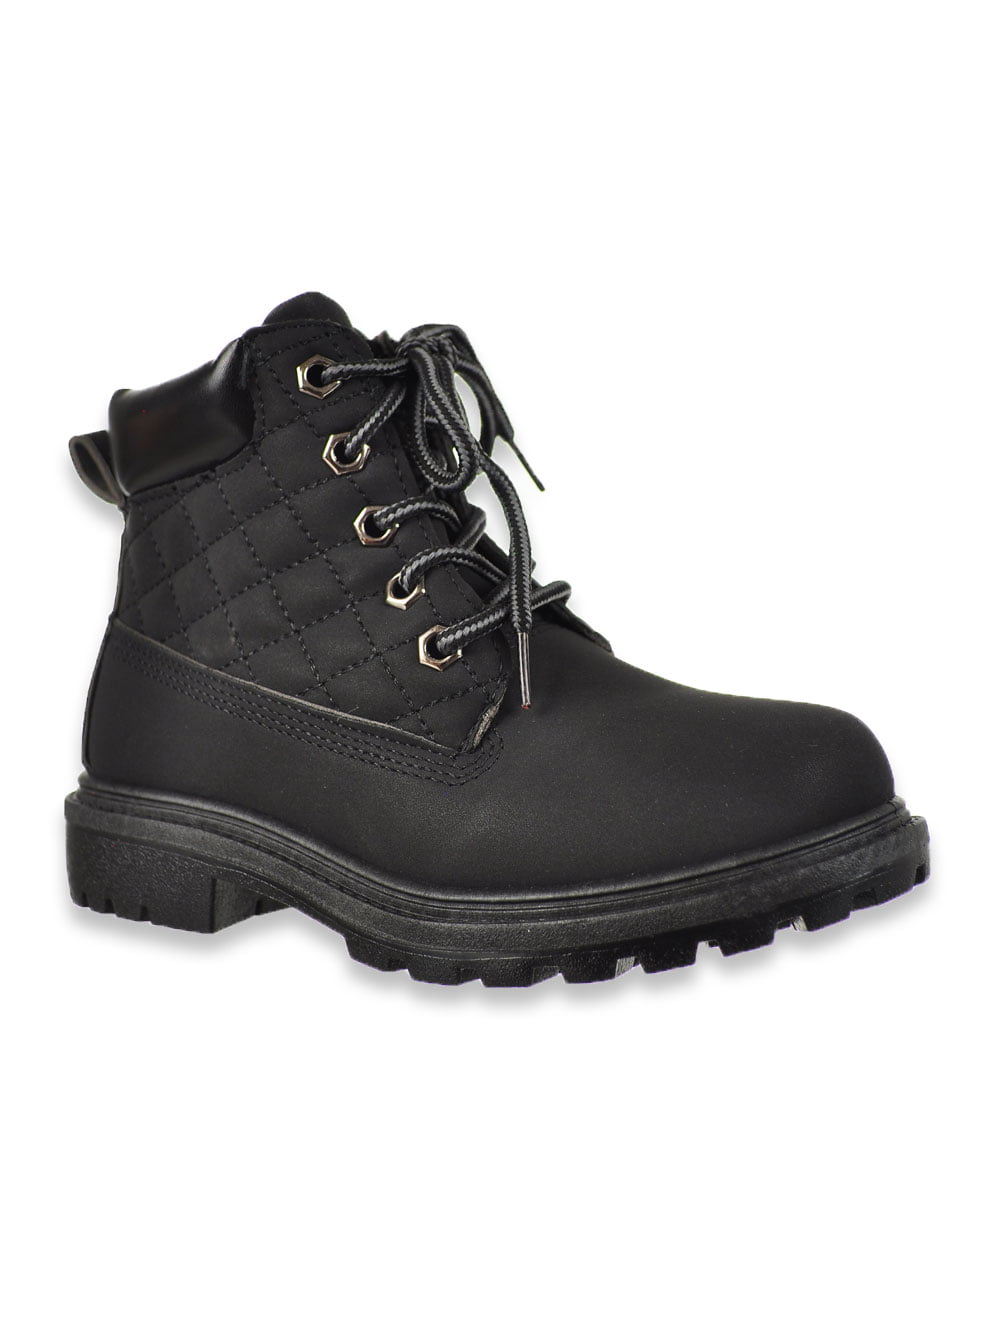 Jesco Boys Quilted Stitch Construction Boots